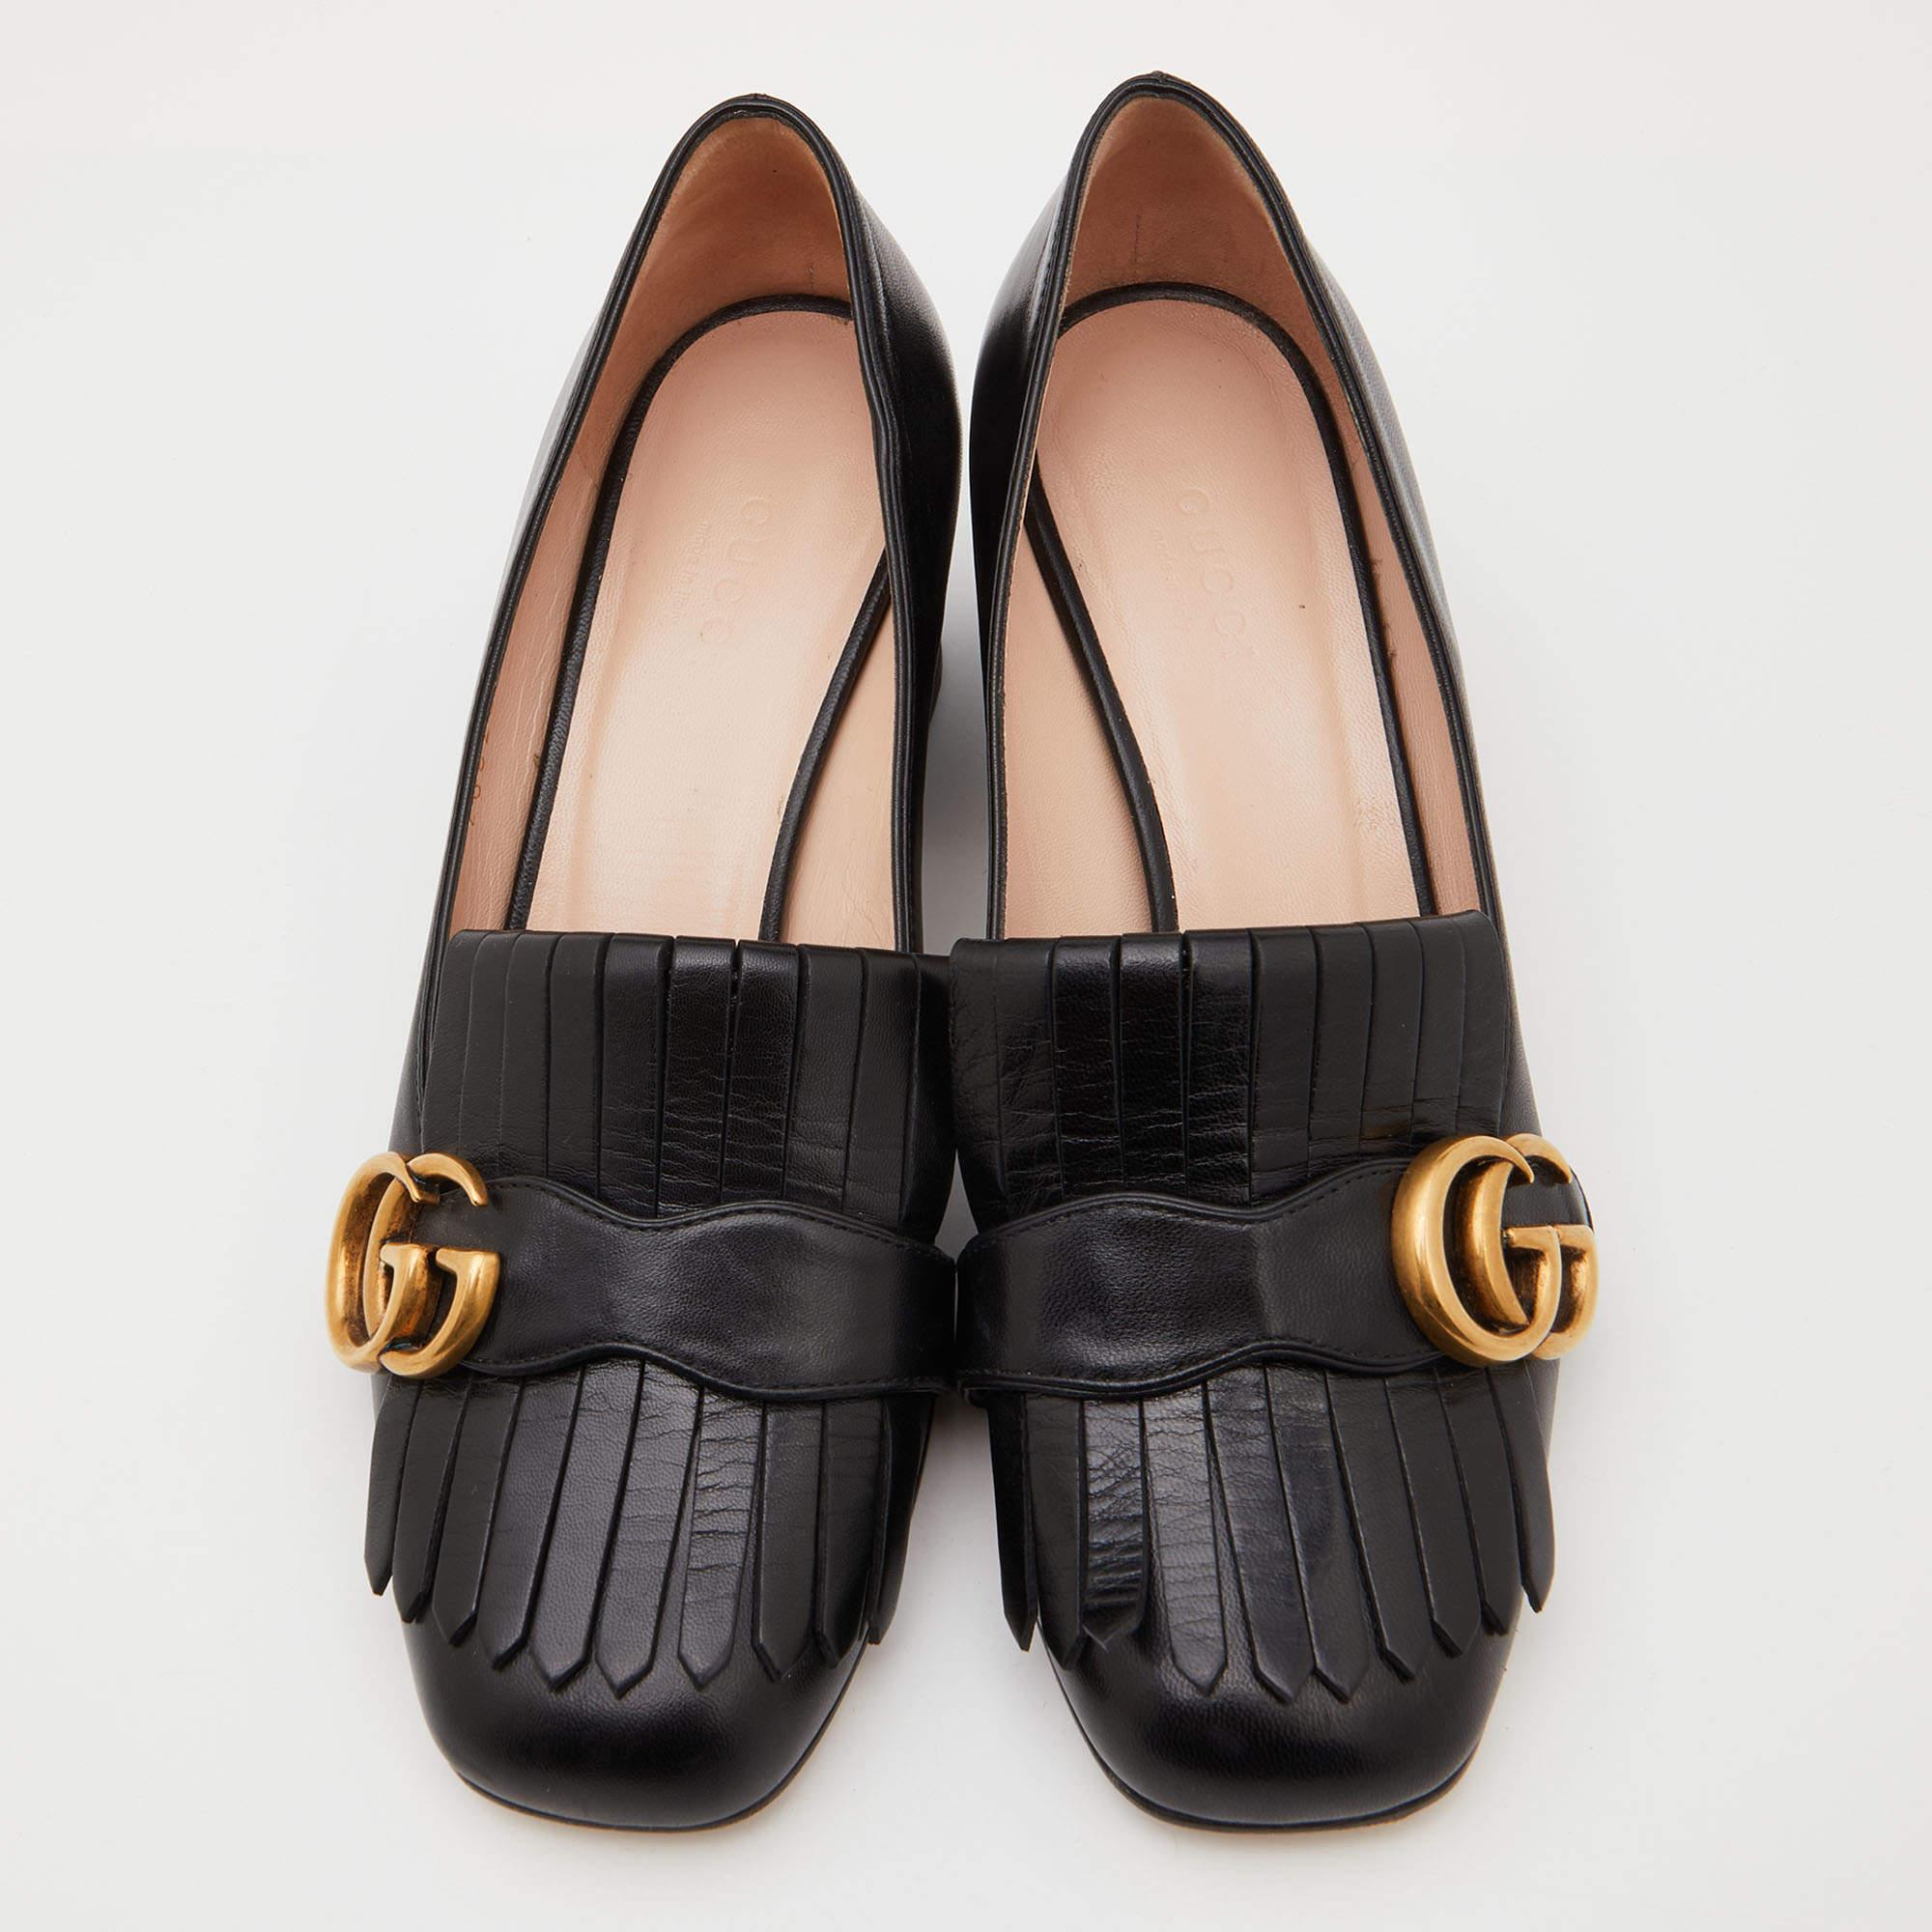 Complement your well-put-together outfit with these authentic Gucci shoes. Timeless and classy, they have an amazing construction for enduring quality and comfortable fit.

Includes: Branded Dustbag

